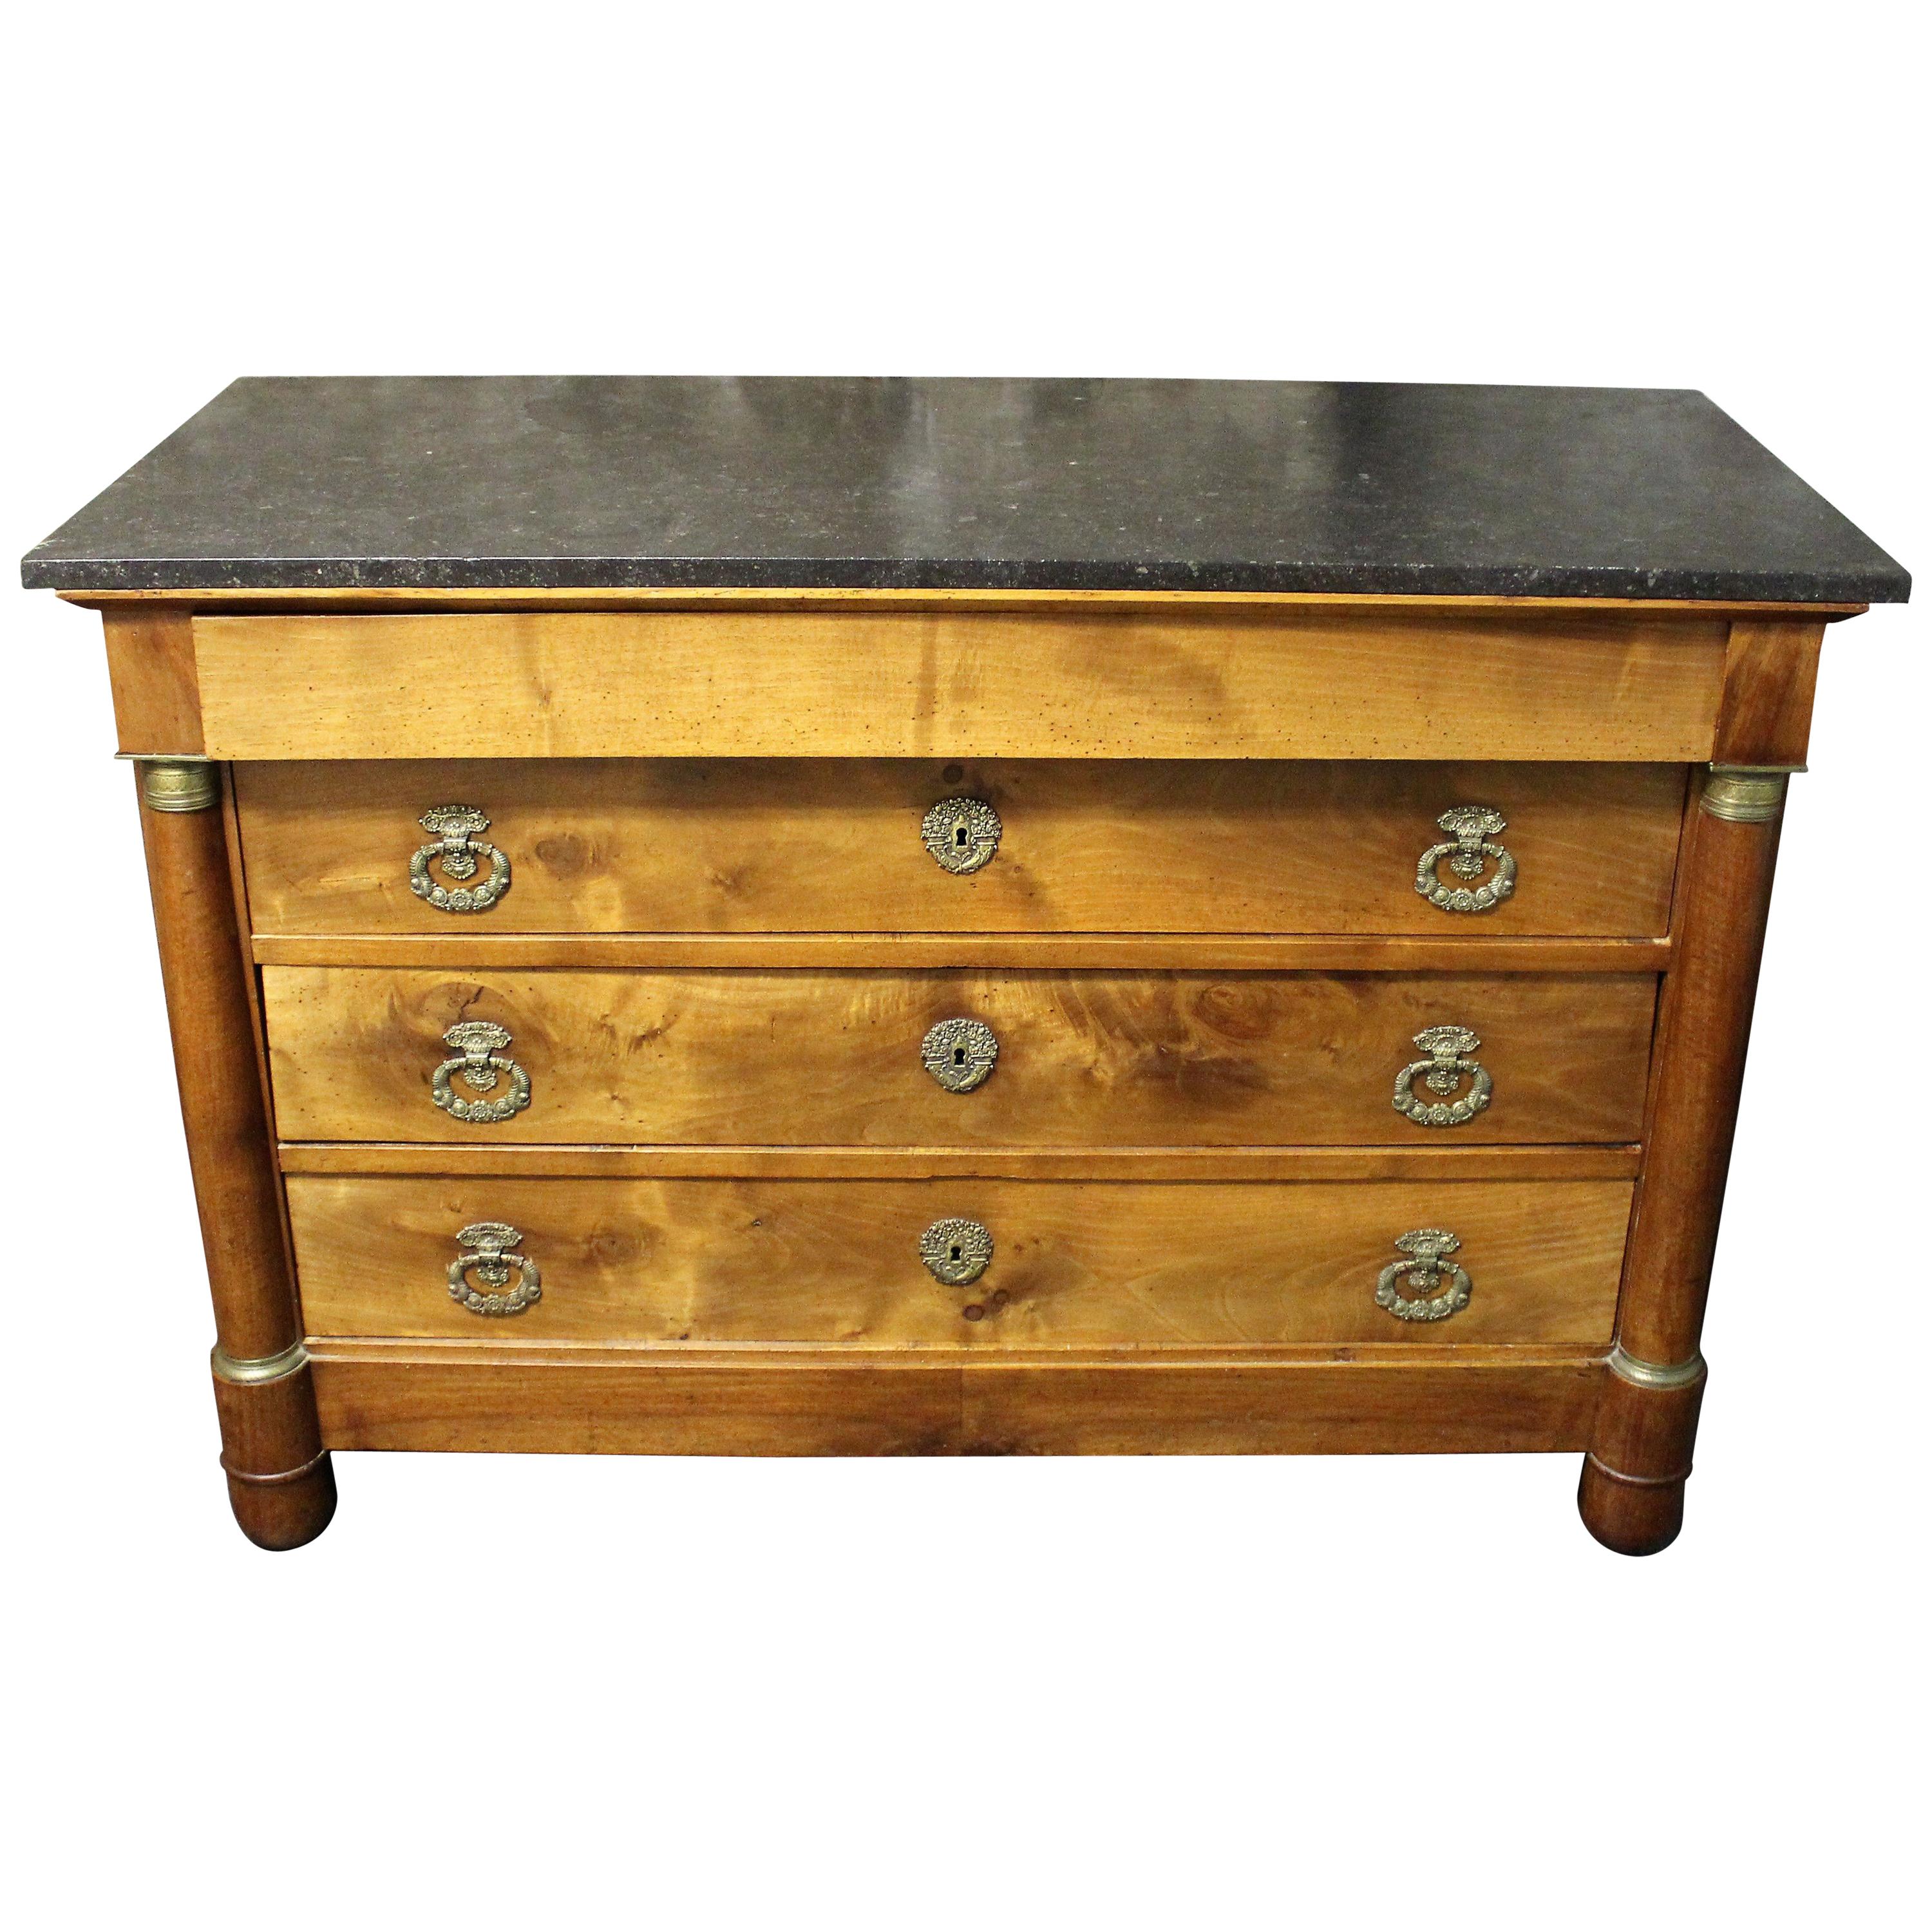 19th Century French Empire Commode in Walnut with Black Marble Top